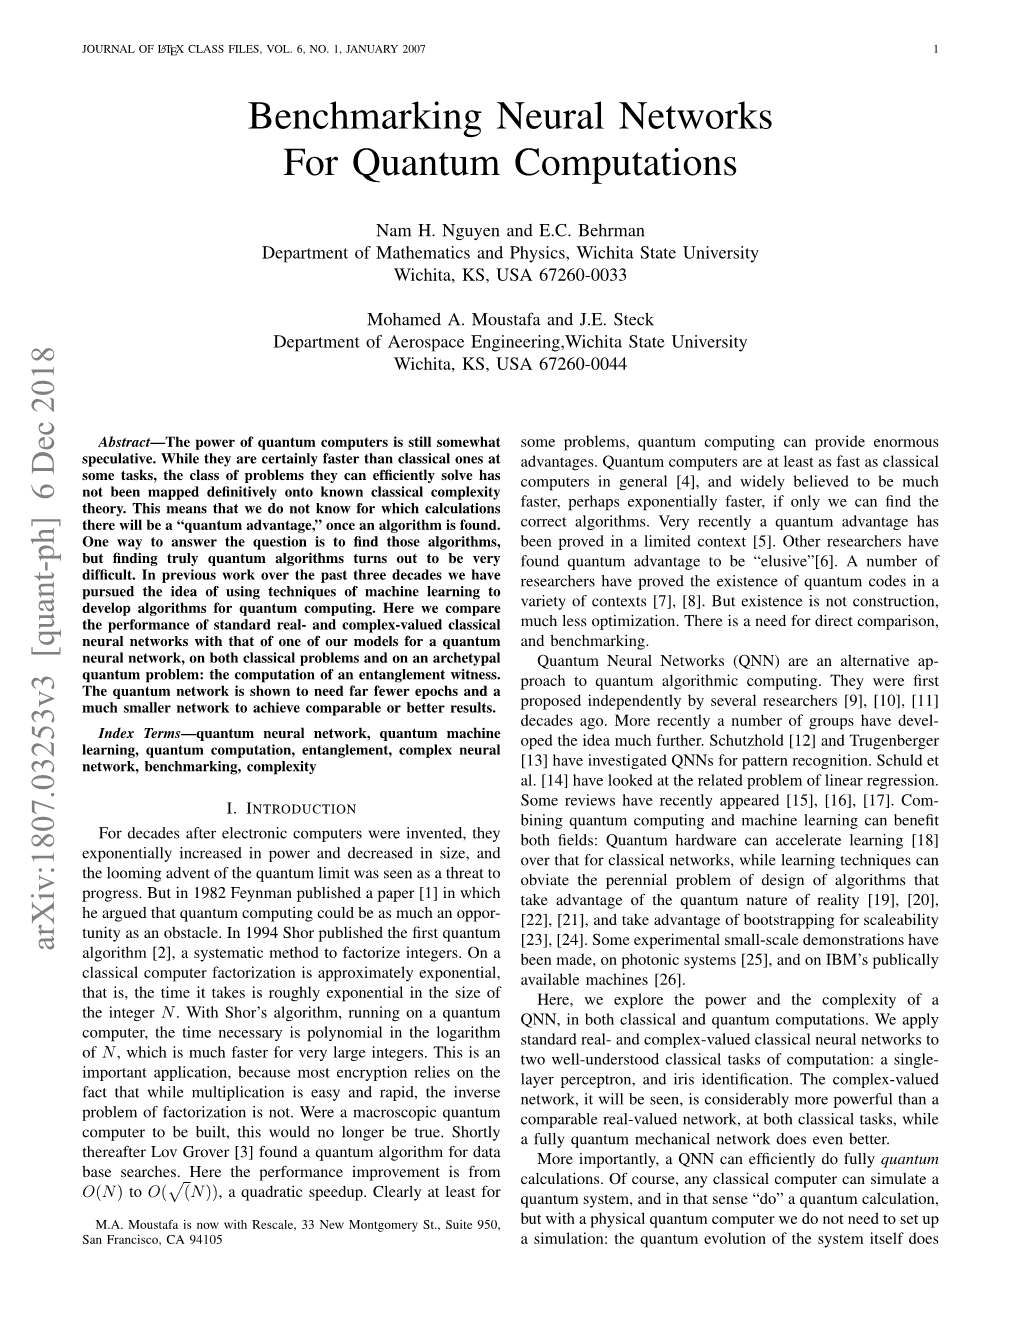 Benchmarking Neural Networks for Quantum Computations